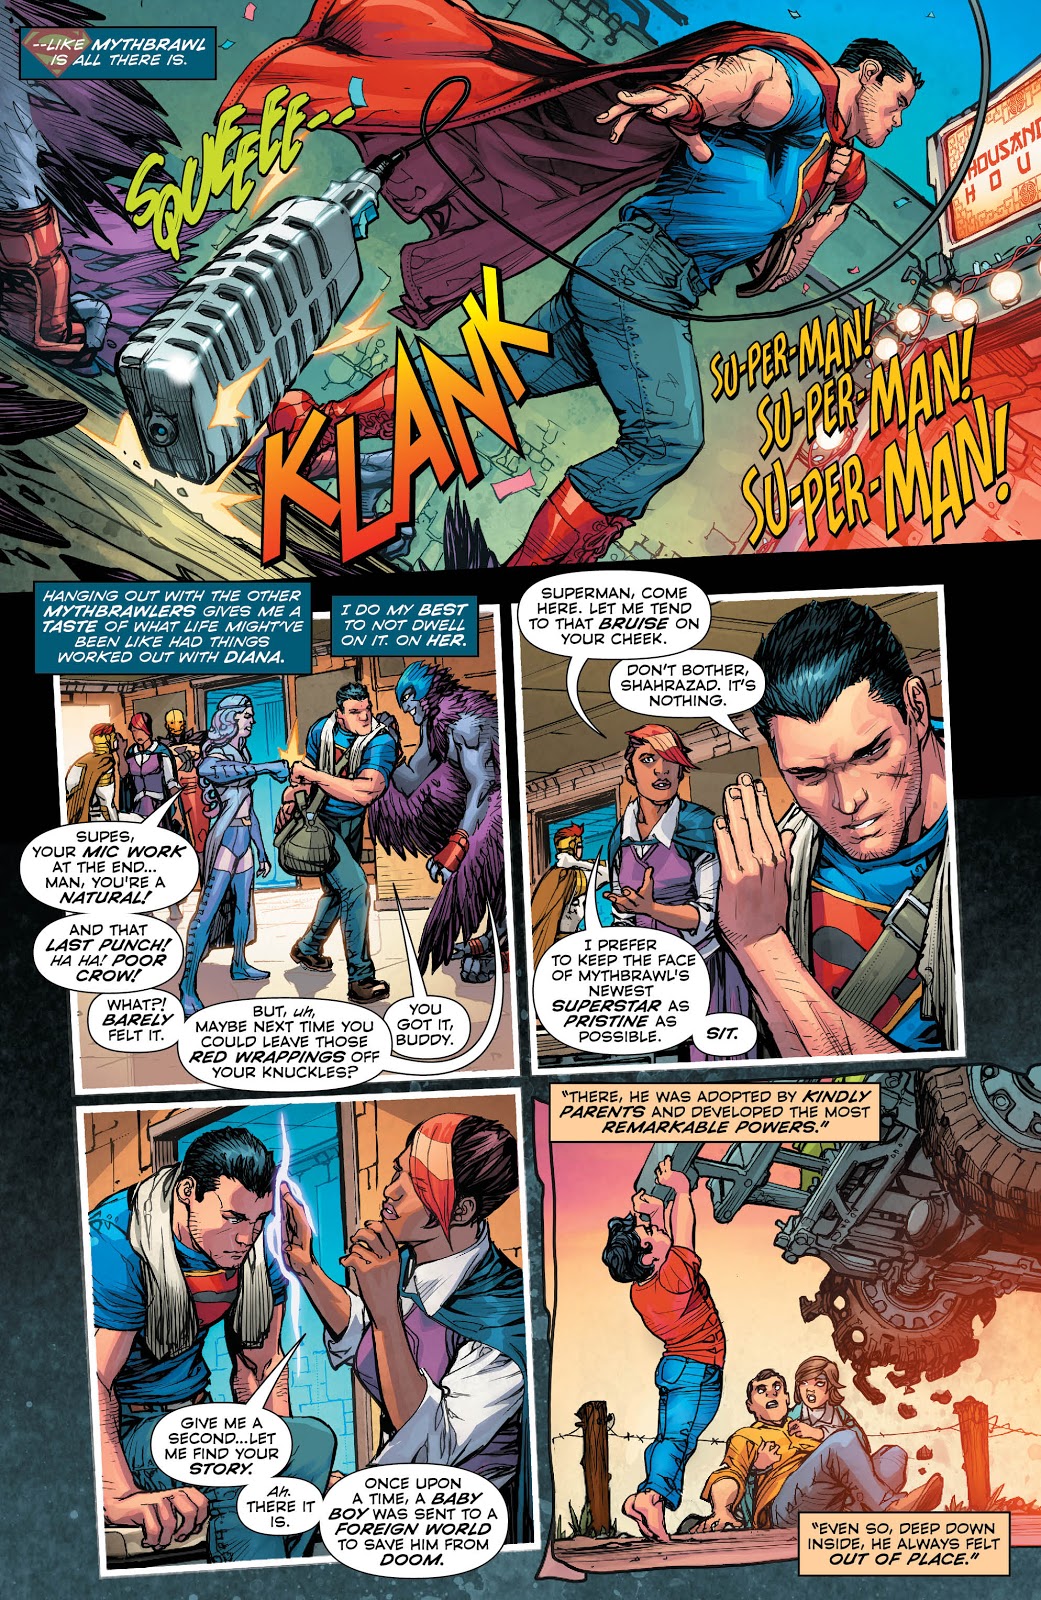 Superman Just Died A Pointless Death